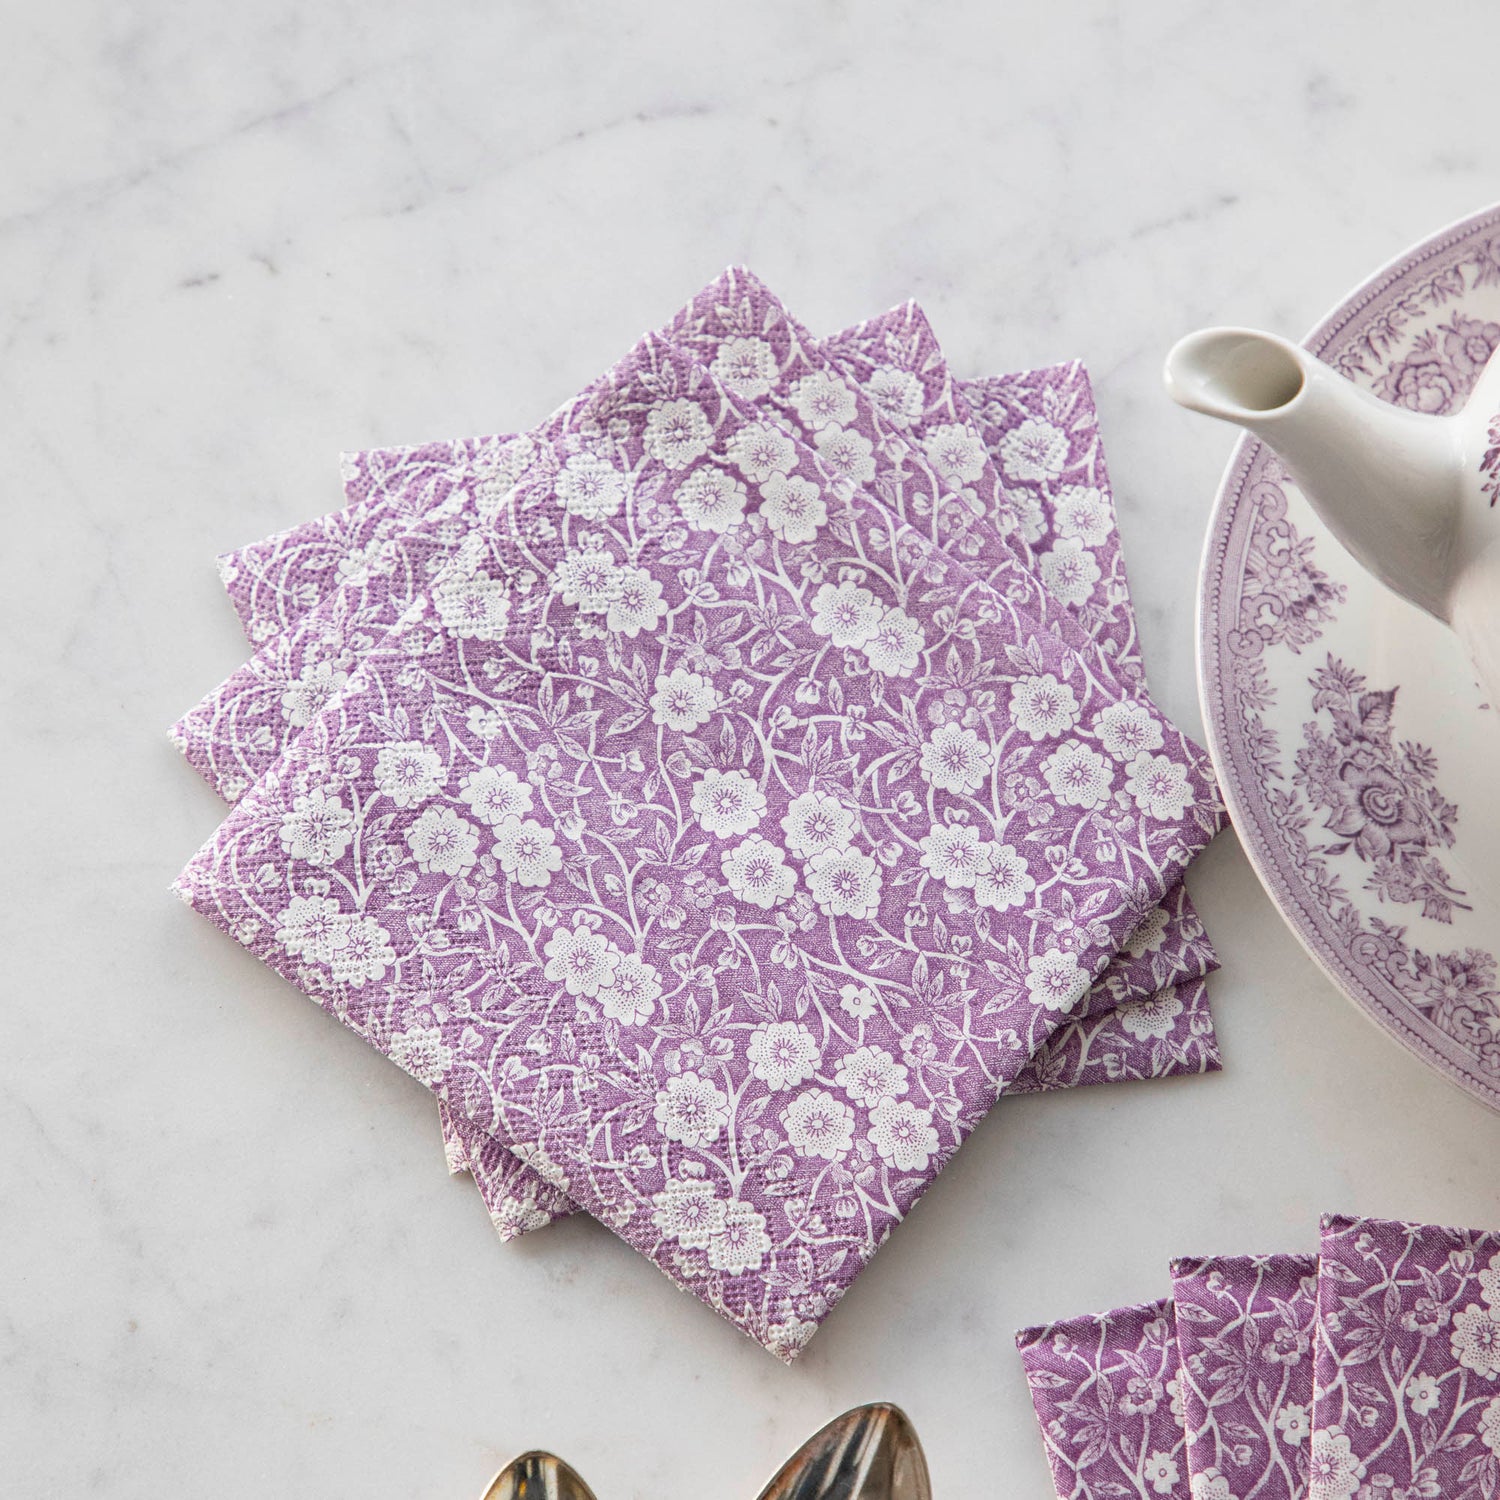 A set of beautiful Lilac Calico Napkins by Hester &amp; Cook exquisitely decorated on a table next to a teapot.